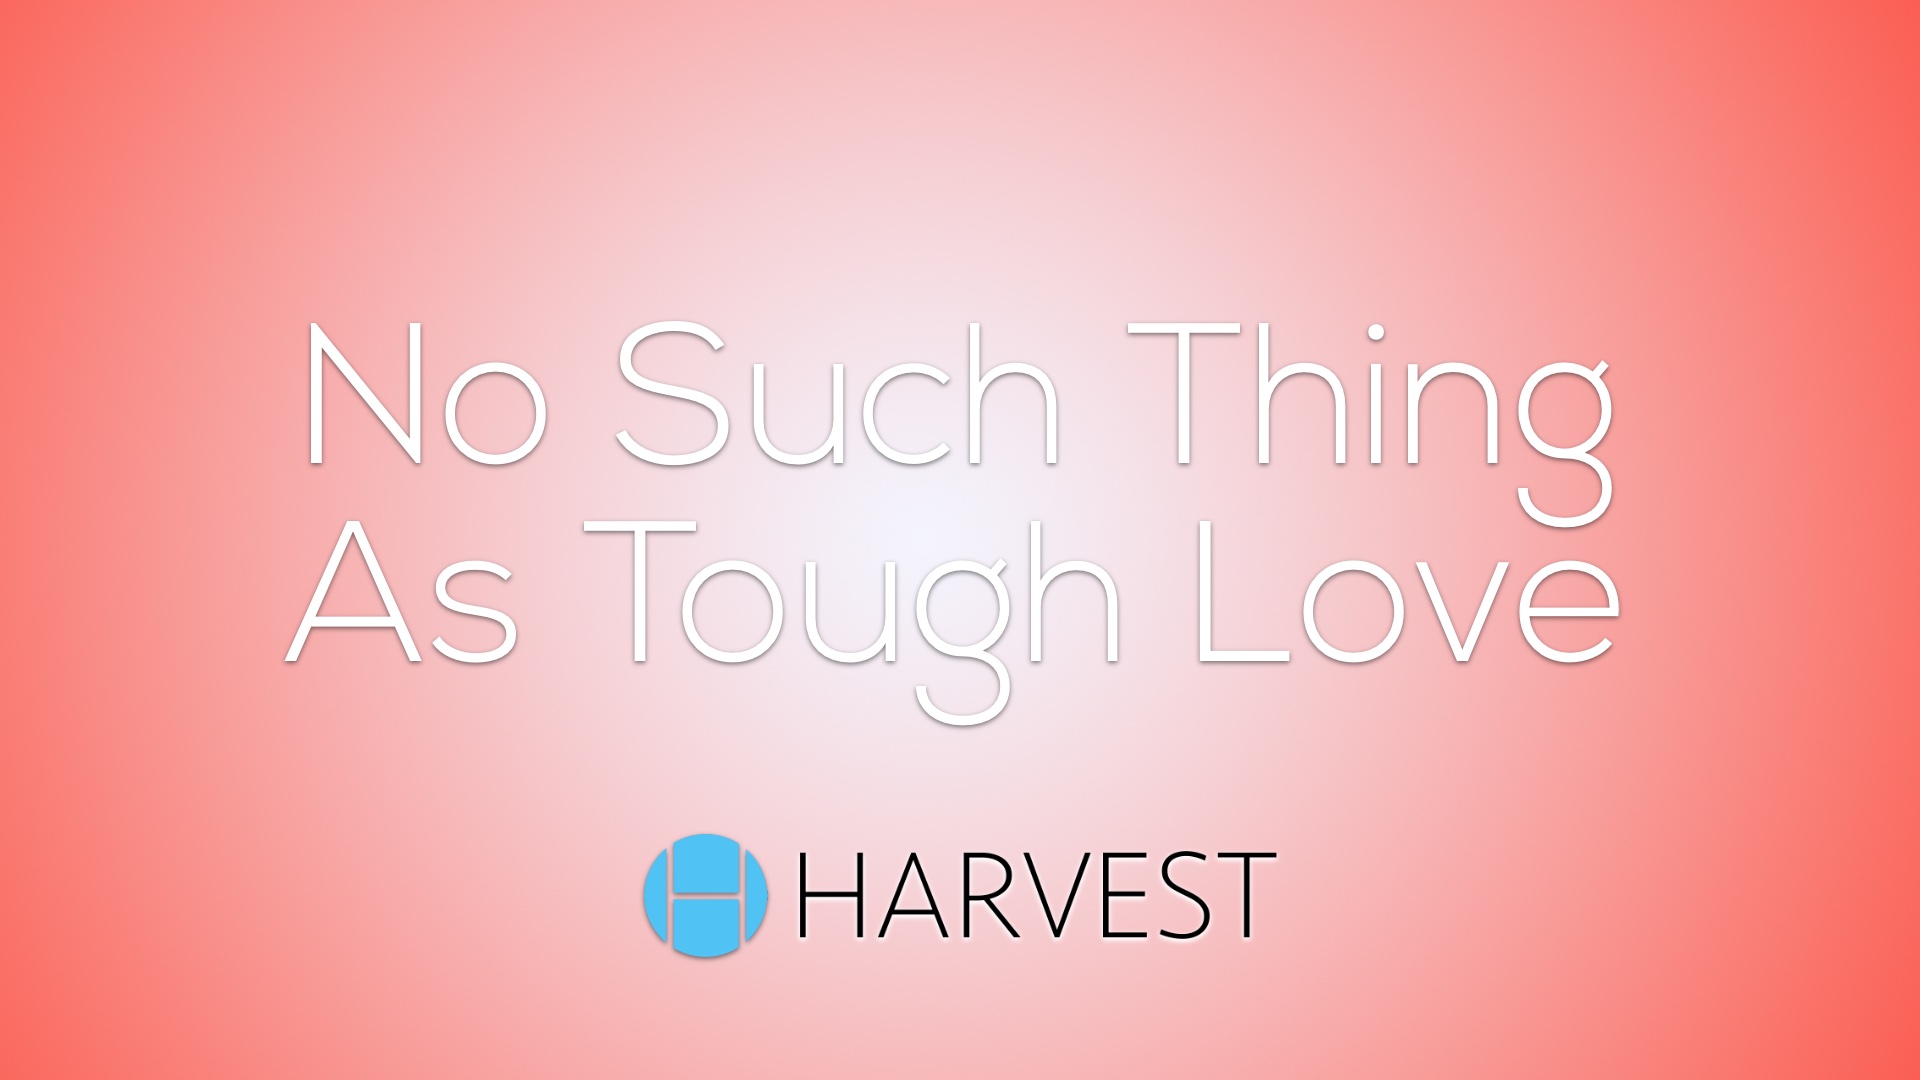 No Such Thing As Tough Love